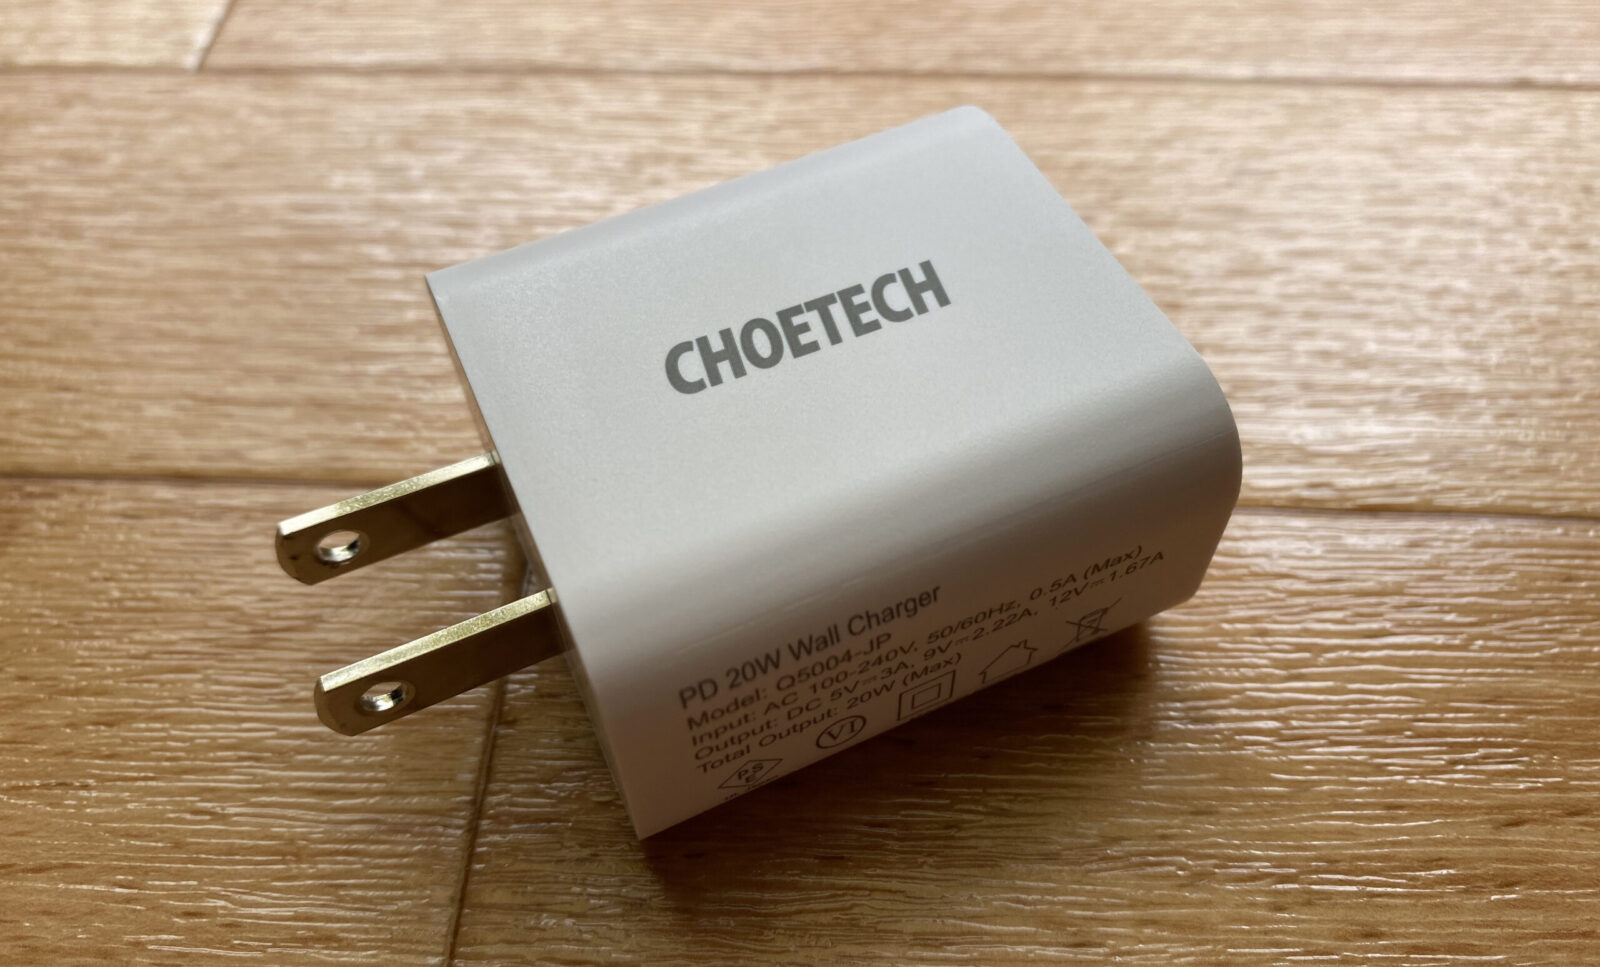 CHOETECHのPD充電器(20W USB-C PD Charger)の評価&レビュー！【iPhone&Android対応】のサムネイル画像